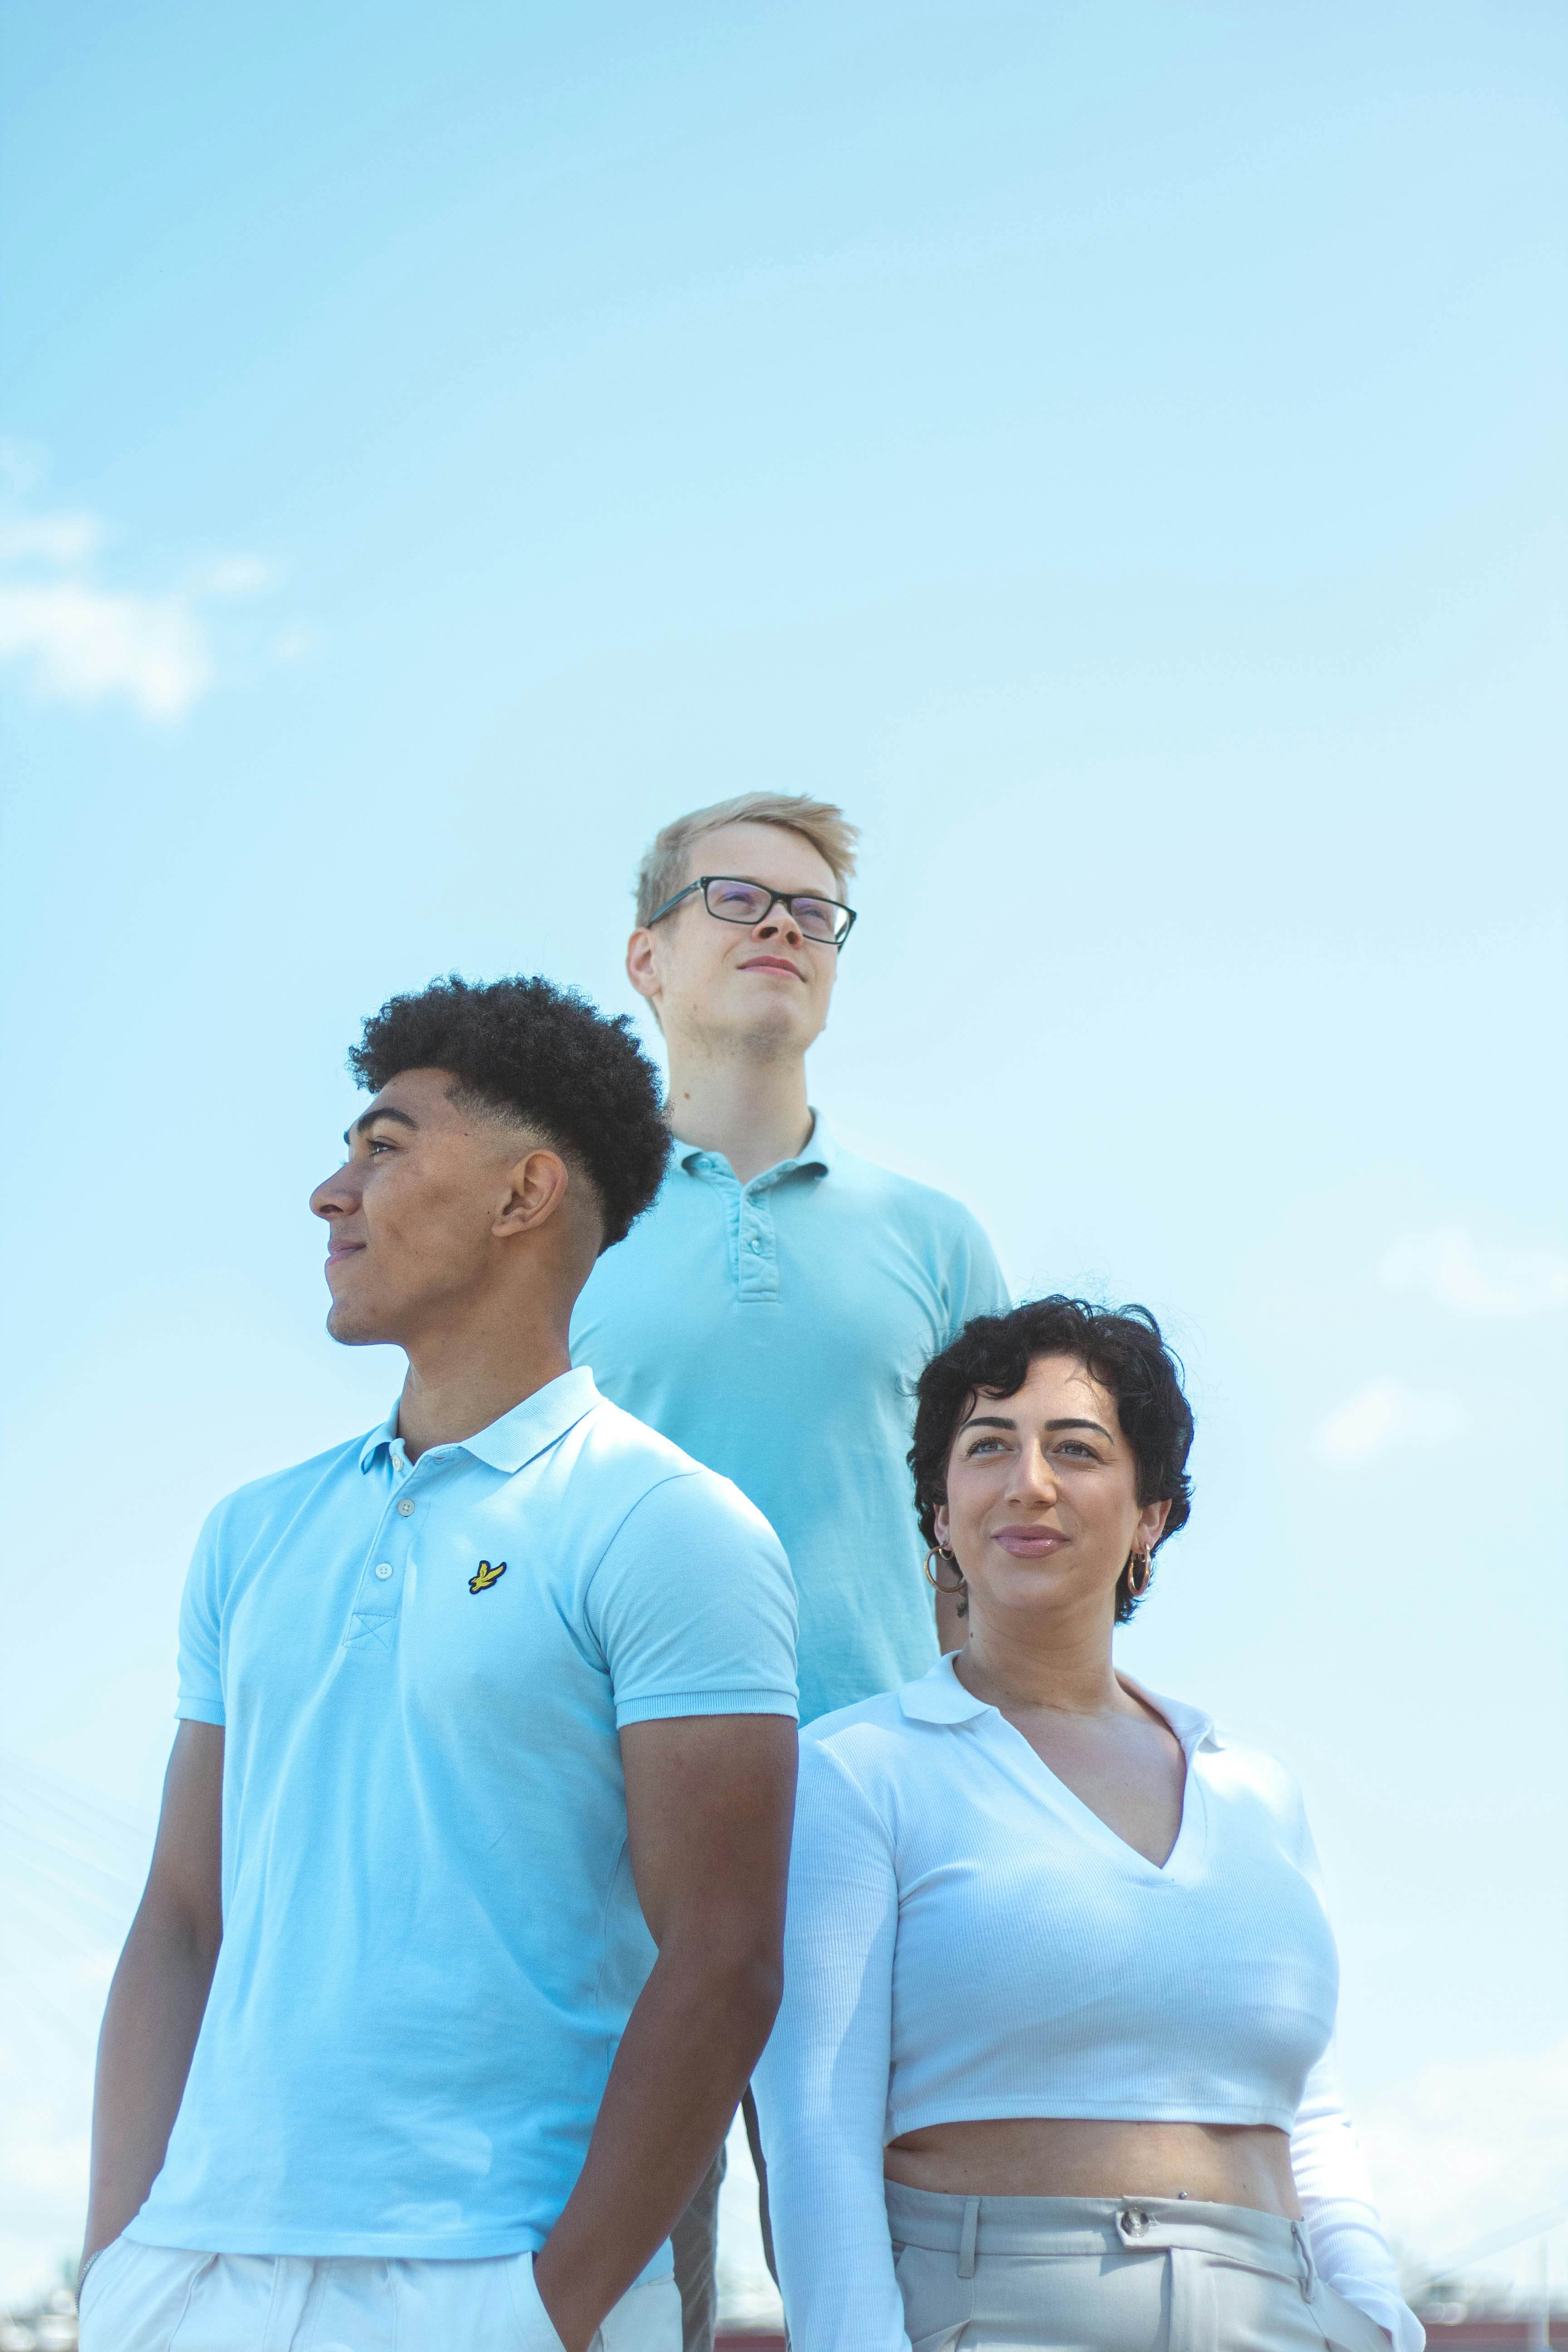 Group photo of three marketeers posing in front of a sunny background